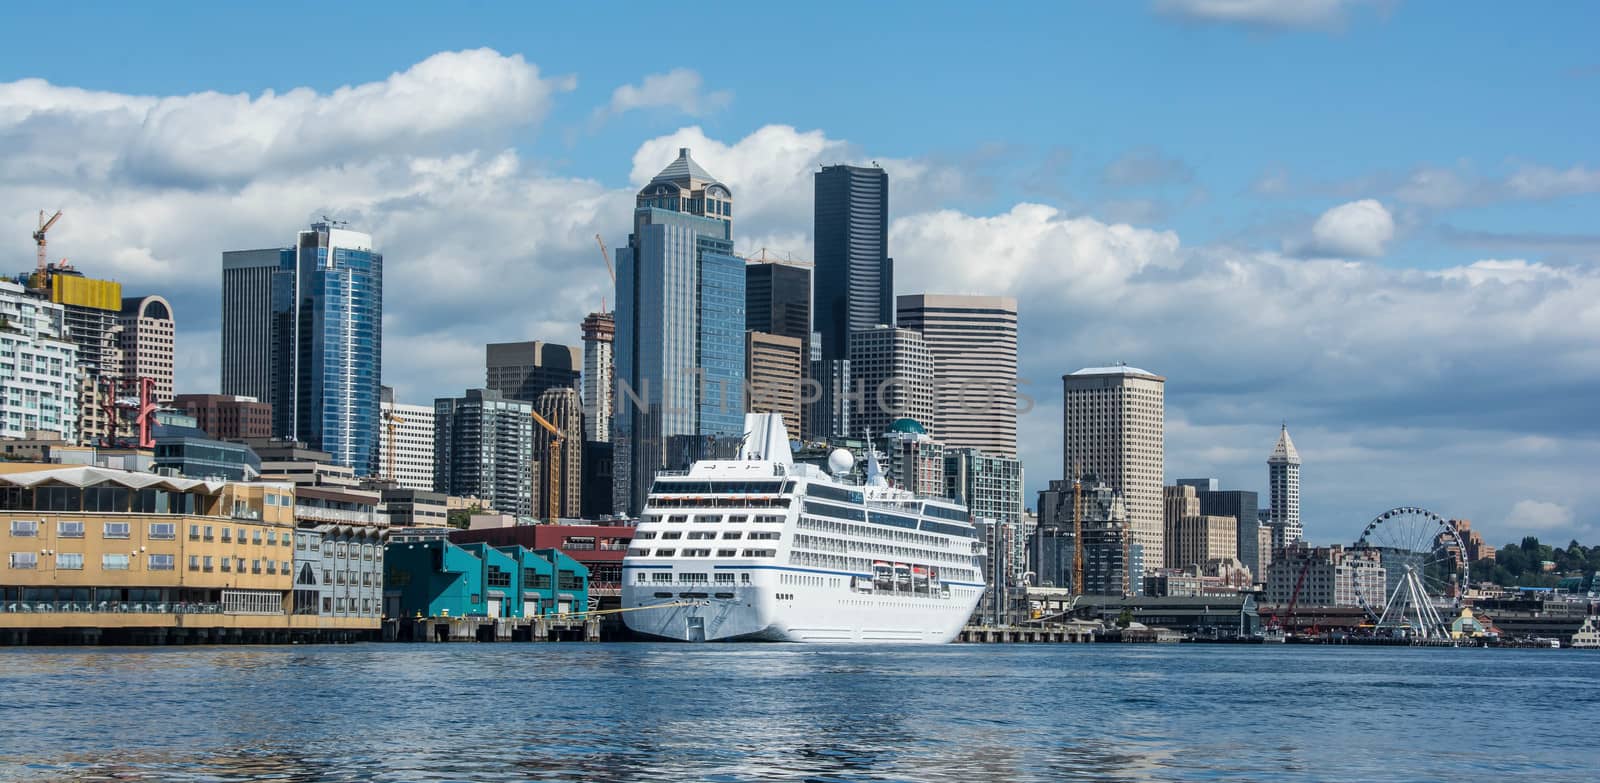 View of Seattle Waterfront with Cruise Ship at terminal taken from Elliott Bay